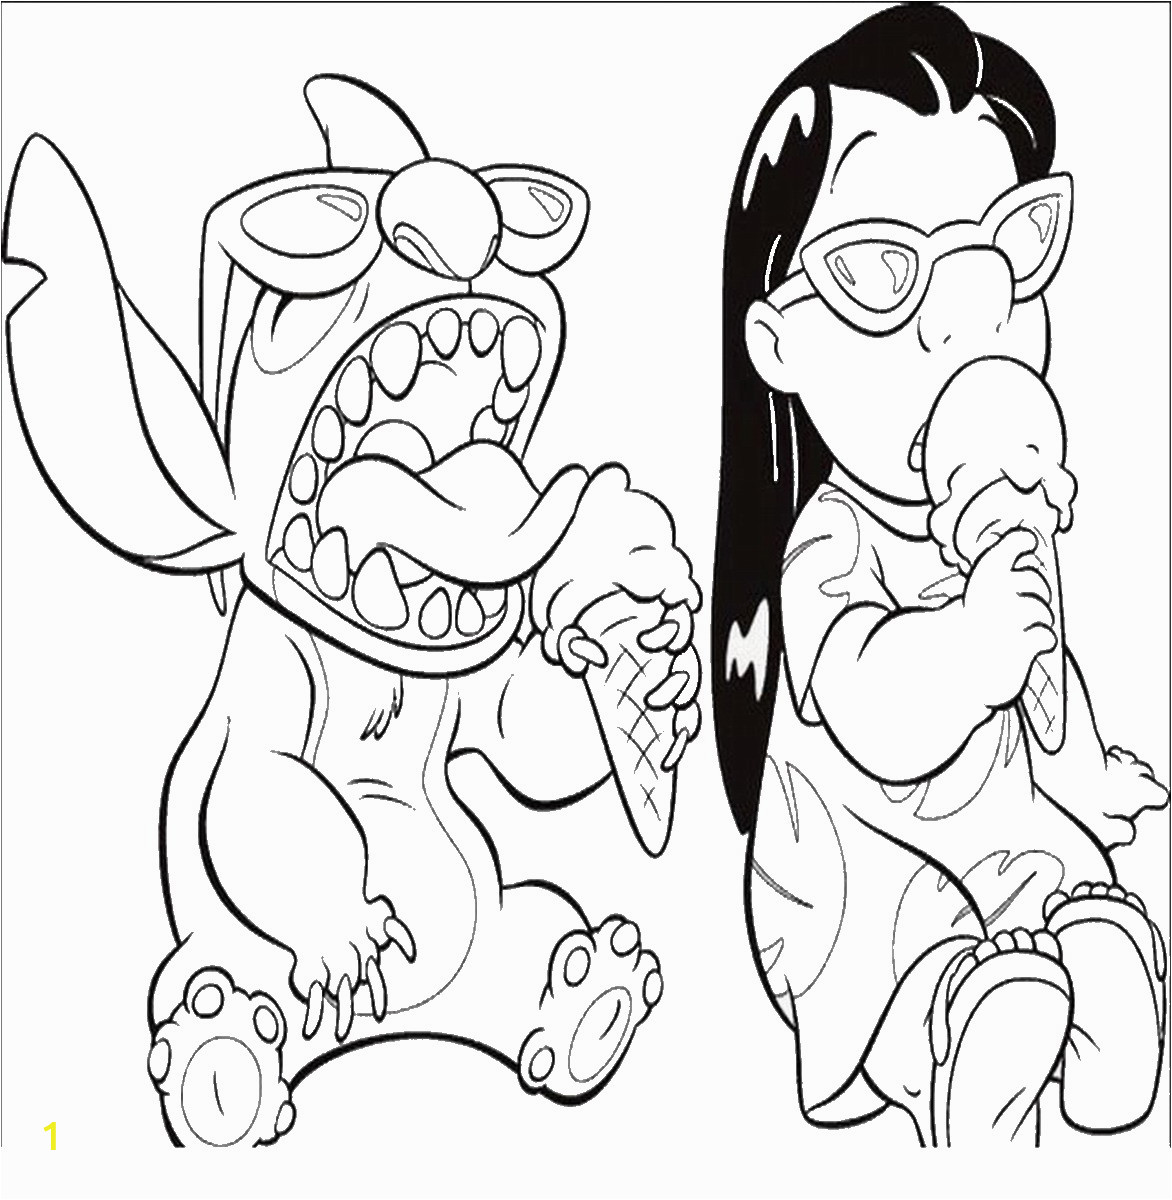 Lilo and Stitch Coloring Pages Online Lilo and Stich Coloring Pages